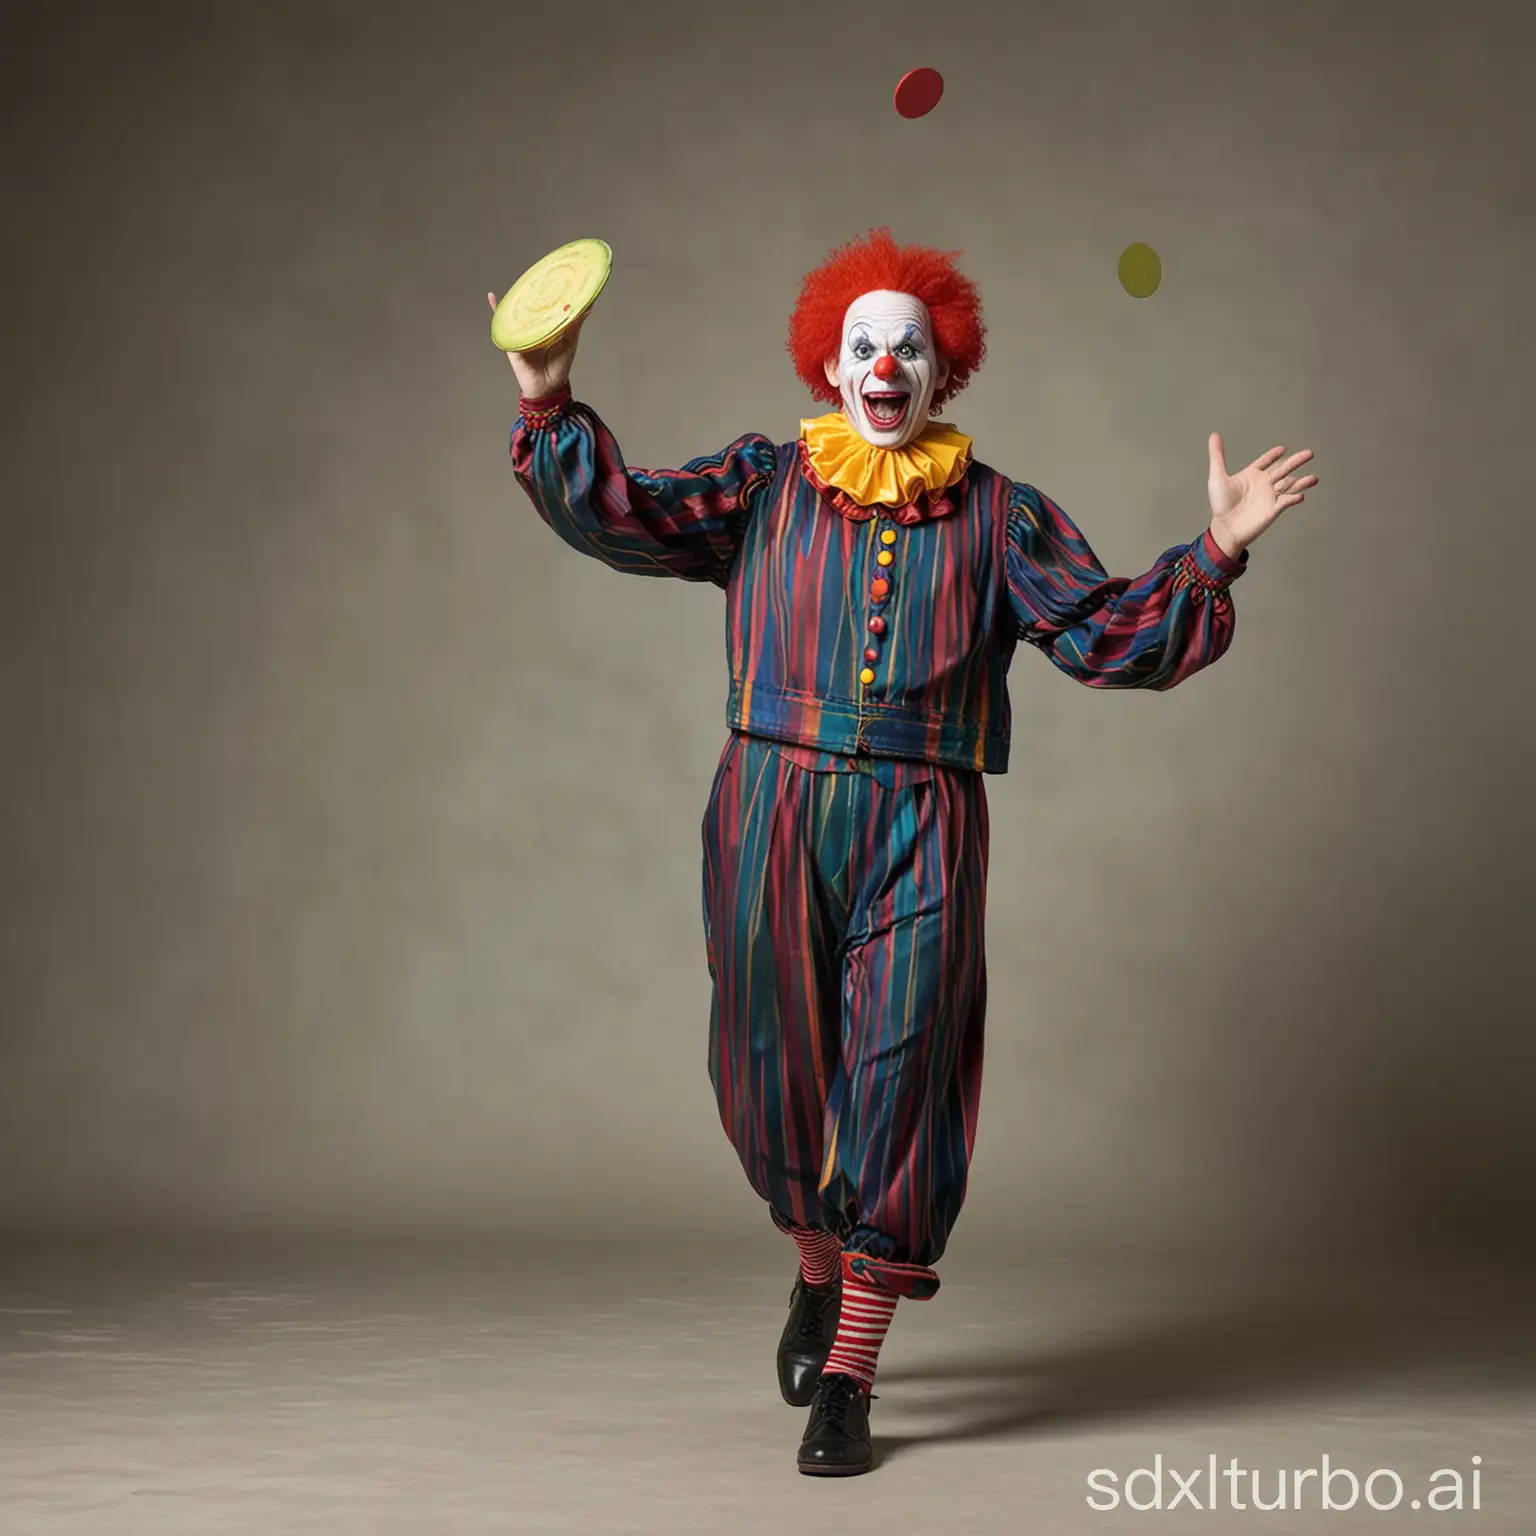 Clown-Juggling-with-Frisbee-Knife-and-Cucumber